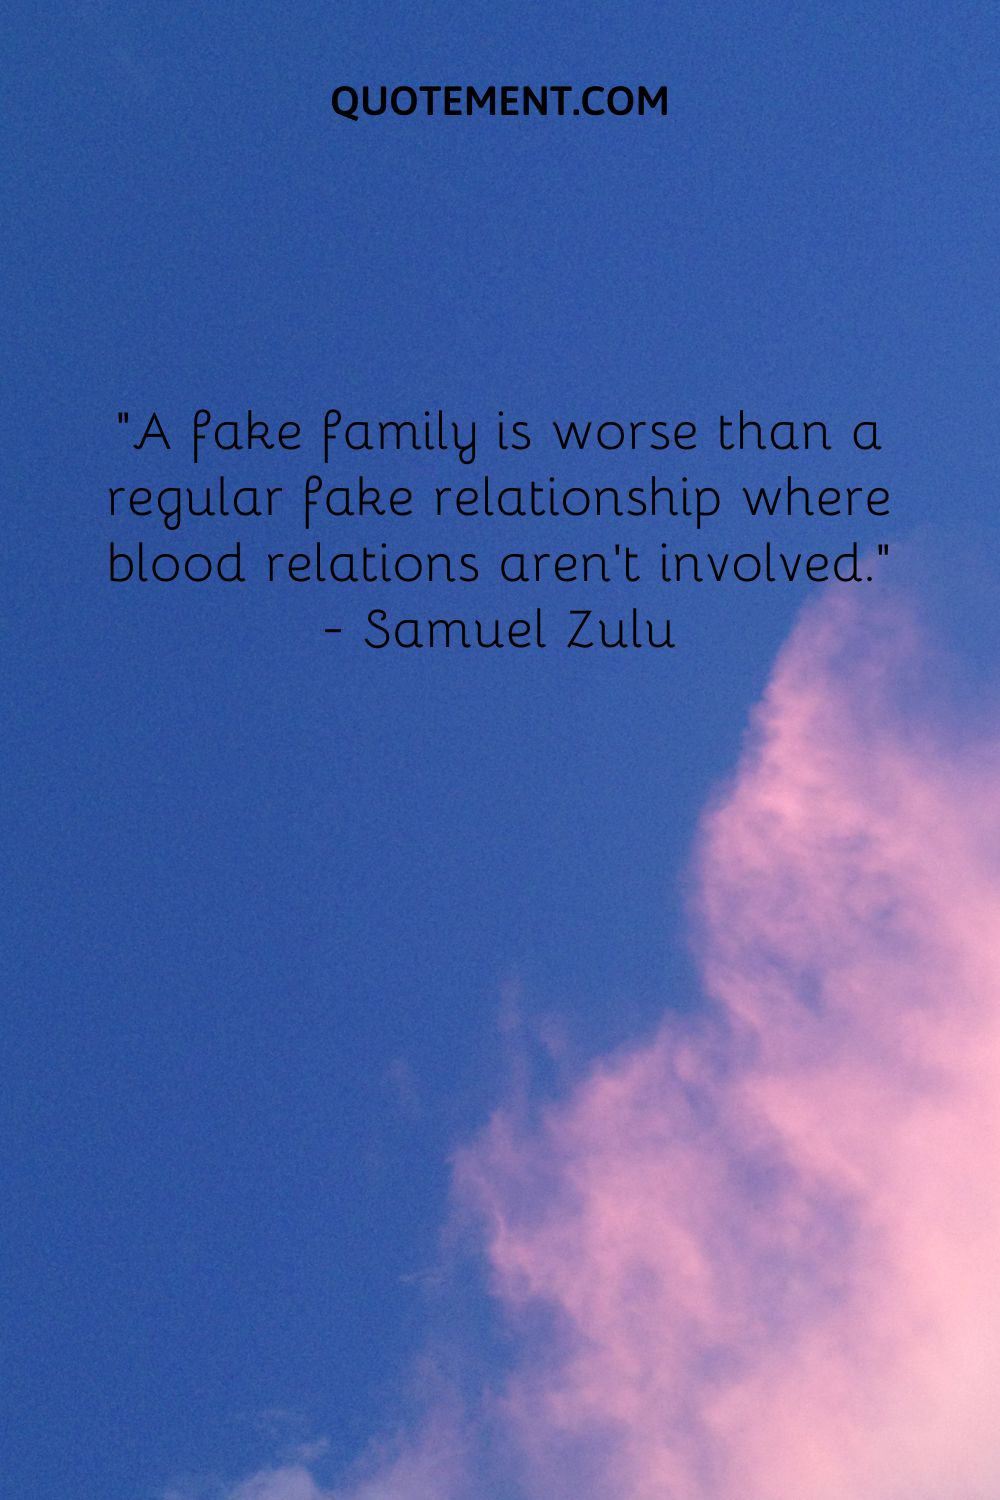 A fake family is worse than a regular fake relationship where blood relations aren’t involved